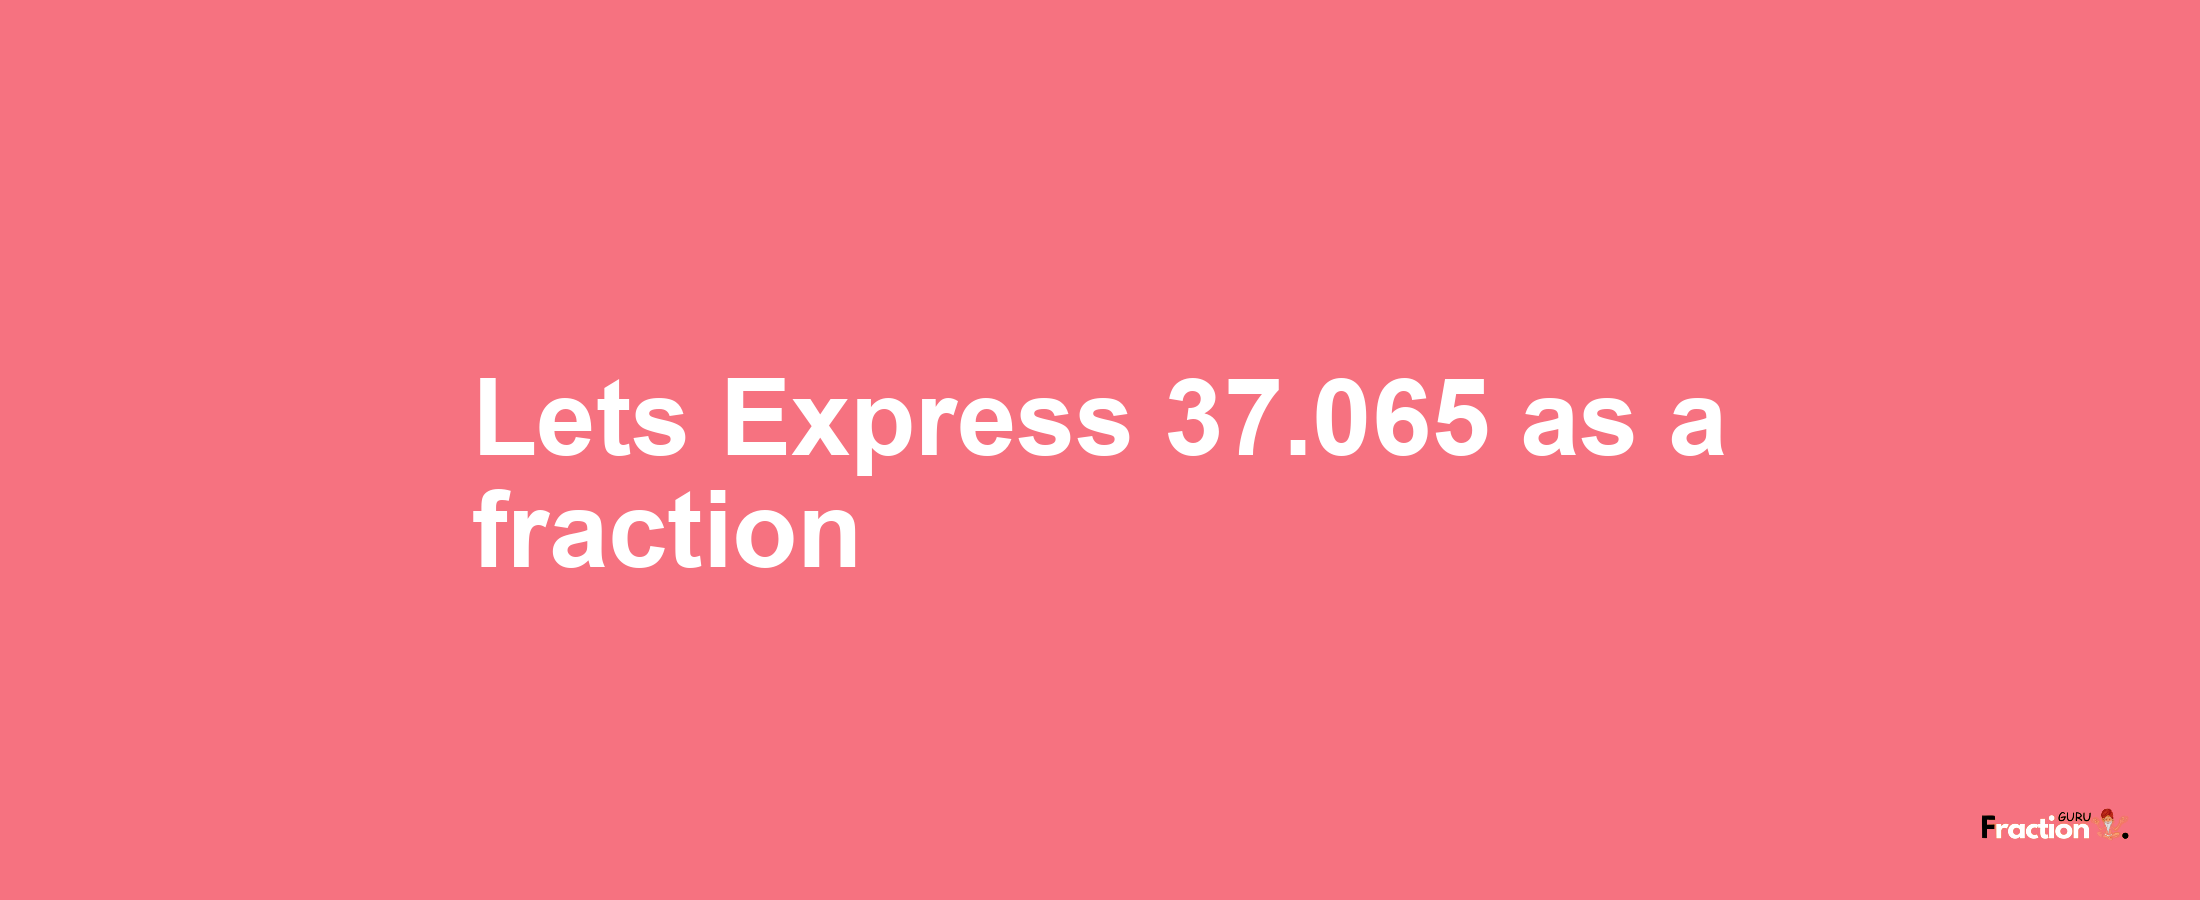 Lets Express 37.065 as afraction